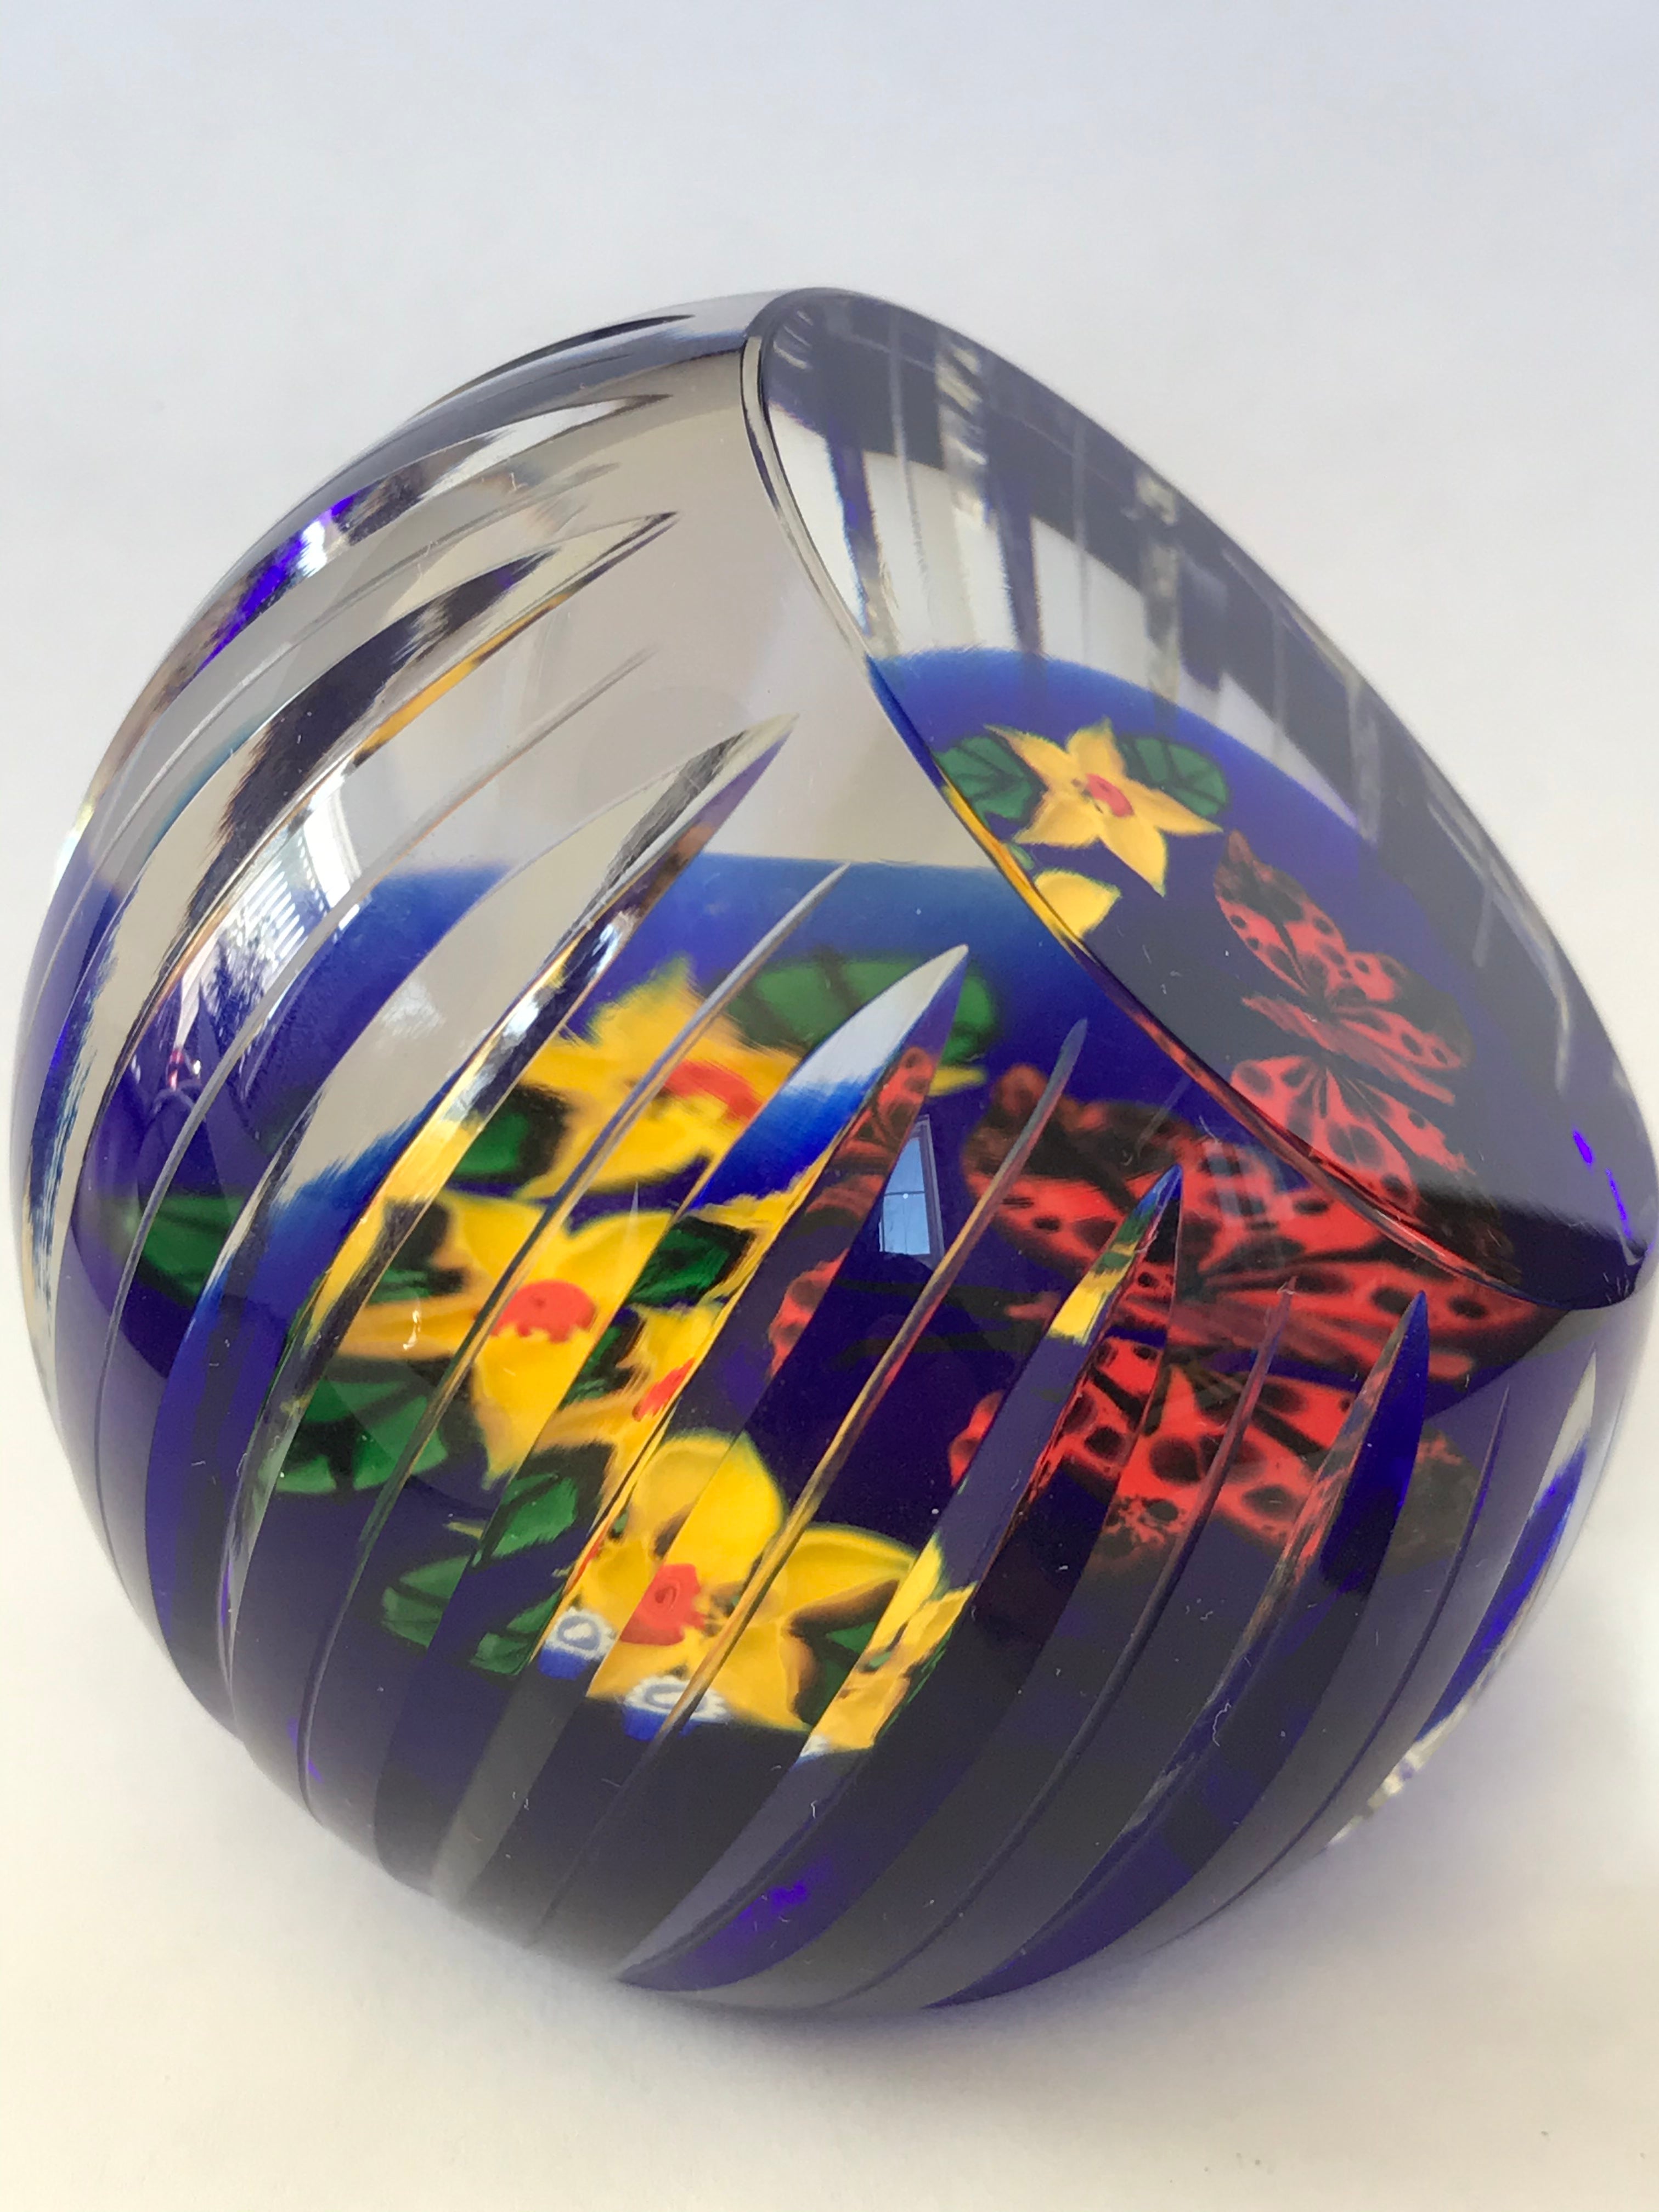 Whitefriars Caithness “Spoilt for Choice” paperweight LE 11/50